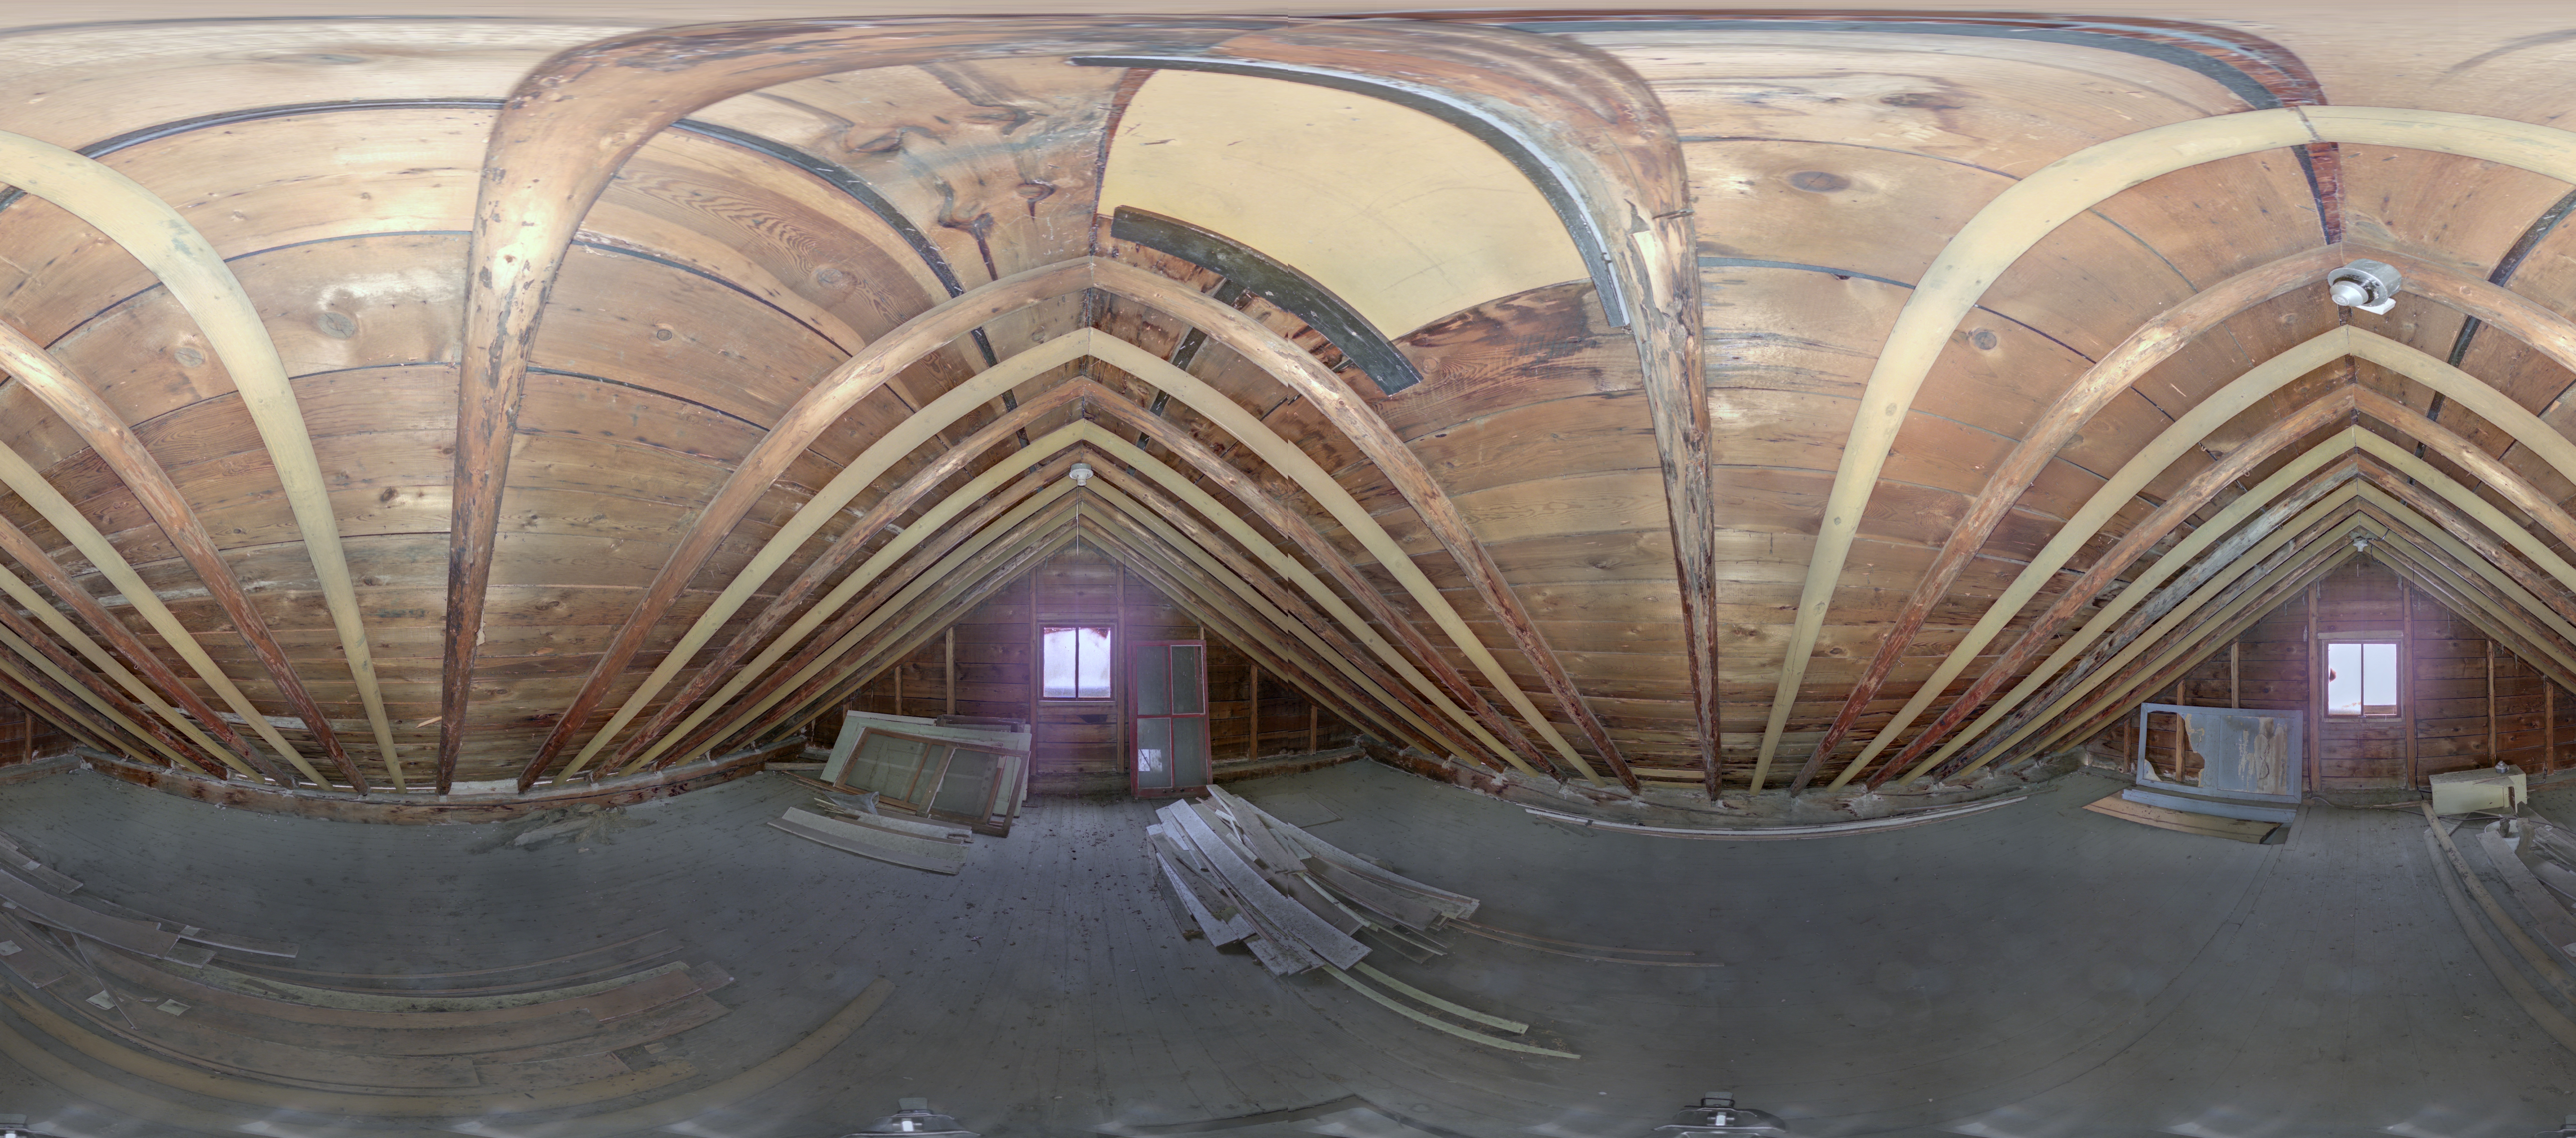 Panoramic image of scanning location 111of the interior of the Foreman's House at Bar U Ranch